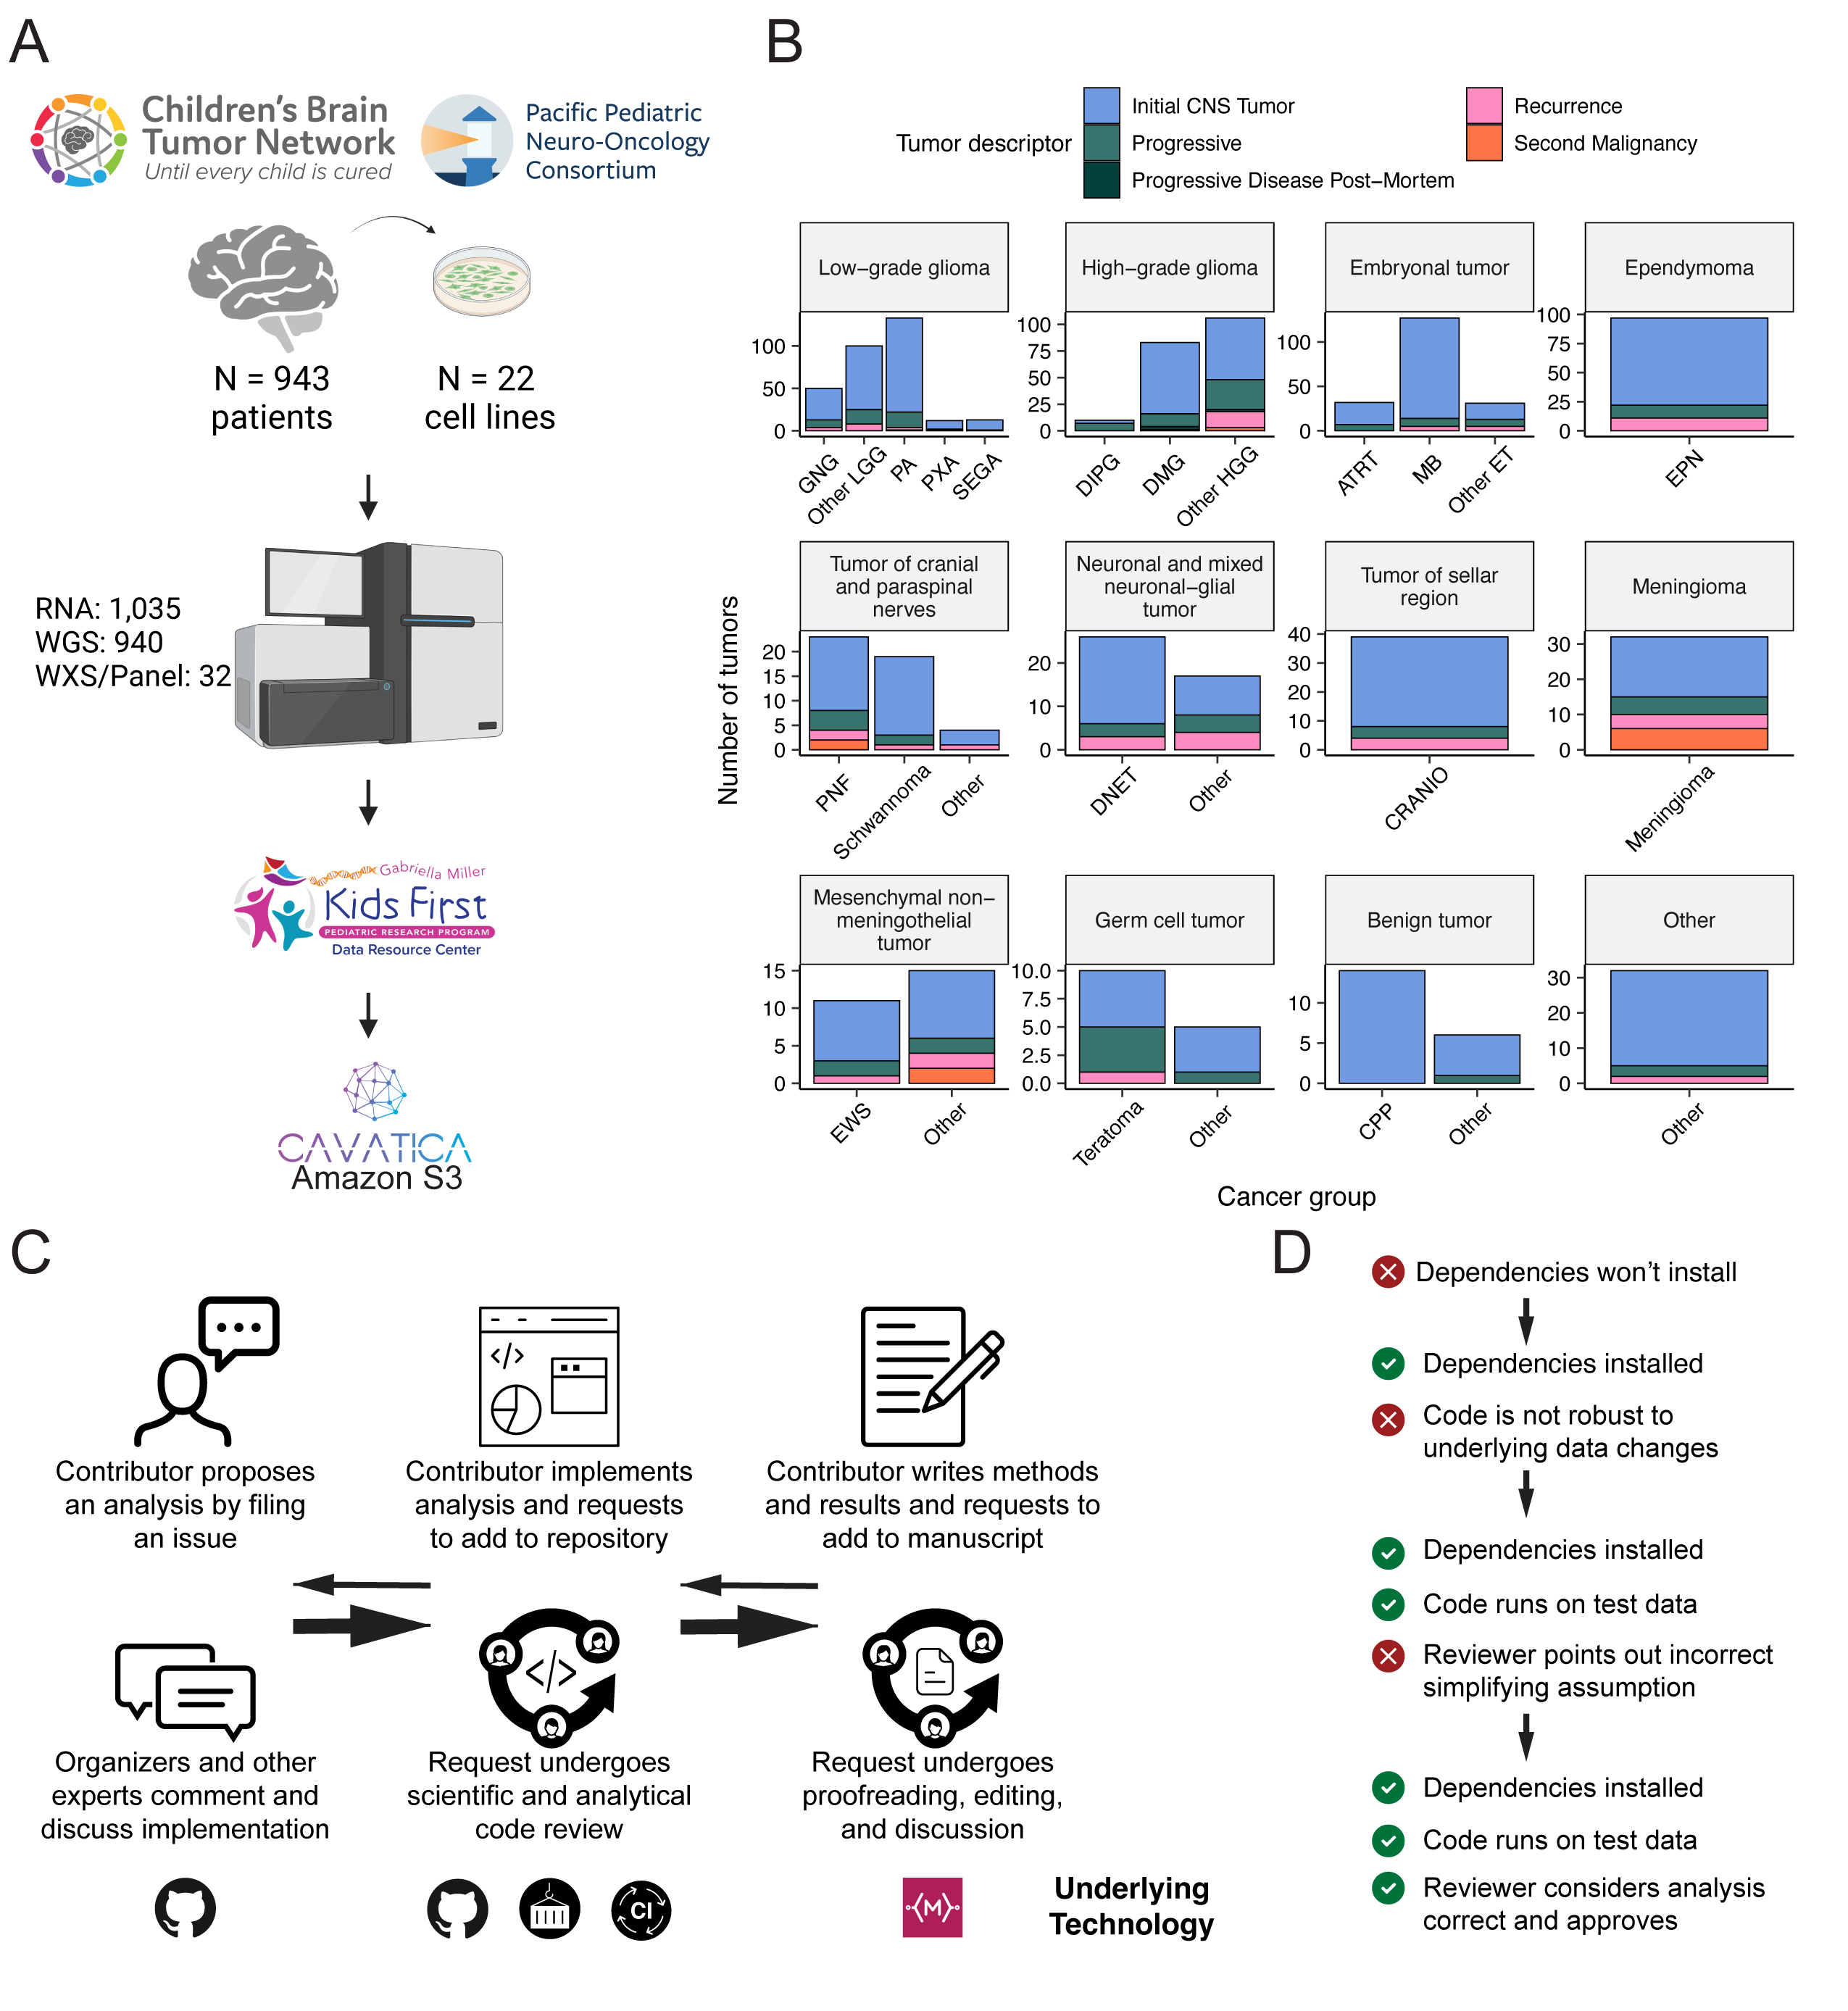 Figure 1: Overview of the OpenPBTA Project. A, CBTN and PNOC collected tumors from 943 patients. 22 tumor cell lines were created, and over 2000 specimens were sequenced (N = 1035 RNA-Seq, N = 940 WGS, and N = 32 WXS or targeted panel). The Kids First Data Resource Center Data harmonized the data using Amazon S3 through CAVATICA. Panel created with BioRender.com. B, Number of biospecimens across phases of therapy, with one broad histology per panel. Each bar denotes a cancer group. (Abbreviations: GNG = ganglioglioma, Other LGG = other low-grade glioma, PA = pilocytic astrocytoma, PXA = pleomorphic xanthoastrocytoma, SEGA = subependymal giant cell astrocytoma, DIPG = diffuse intrinsic pontine glioma, DMG = diffuse midline glioma, Other HGG = other high-grade glioma, ATRT = atypical teratoid rhabdoid tumor, MB = medulloblastoma, Other ET = other embryonal tumor, EPN = ependymoma, PNF = plexiform neurofibroma, DNET = dysembryoplastic neuroepithelial tumor, CRANIO = craniopharyngioma, EWS = Ewing sarcoma, CPP = choroid plexus papilloma). C, Overview of the open analysis and manuscript contribution models. Contributors proposed analyses, implemented it in their fork, and filed a pull request (PR) with proposed changes. PRs underwent review for scientific rigor and accuracy. Container and continuous integration technologies ensured that all software dependencies were included and code was not sensitive to underlying data changes. Finally, a contributor filed a PR documenting their methods and results to the Manubot-powered manuscript repository for review. D, A potential path for an analytical PR. Arrows indicate revisions.